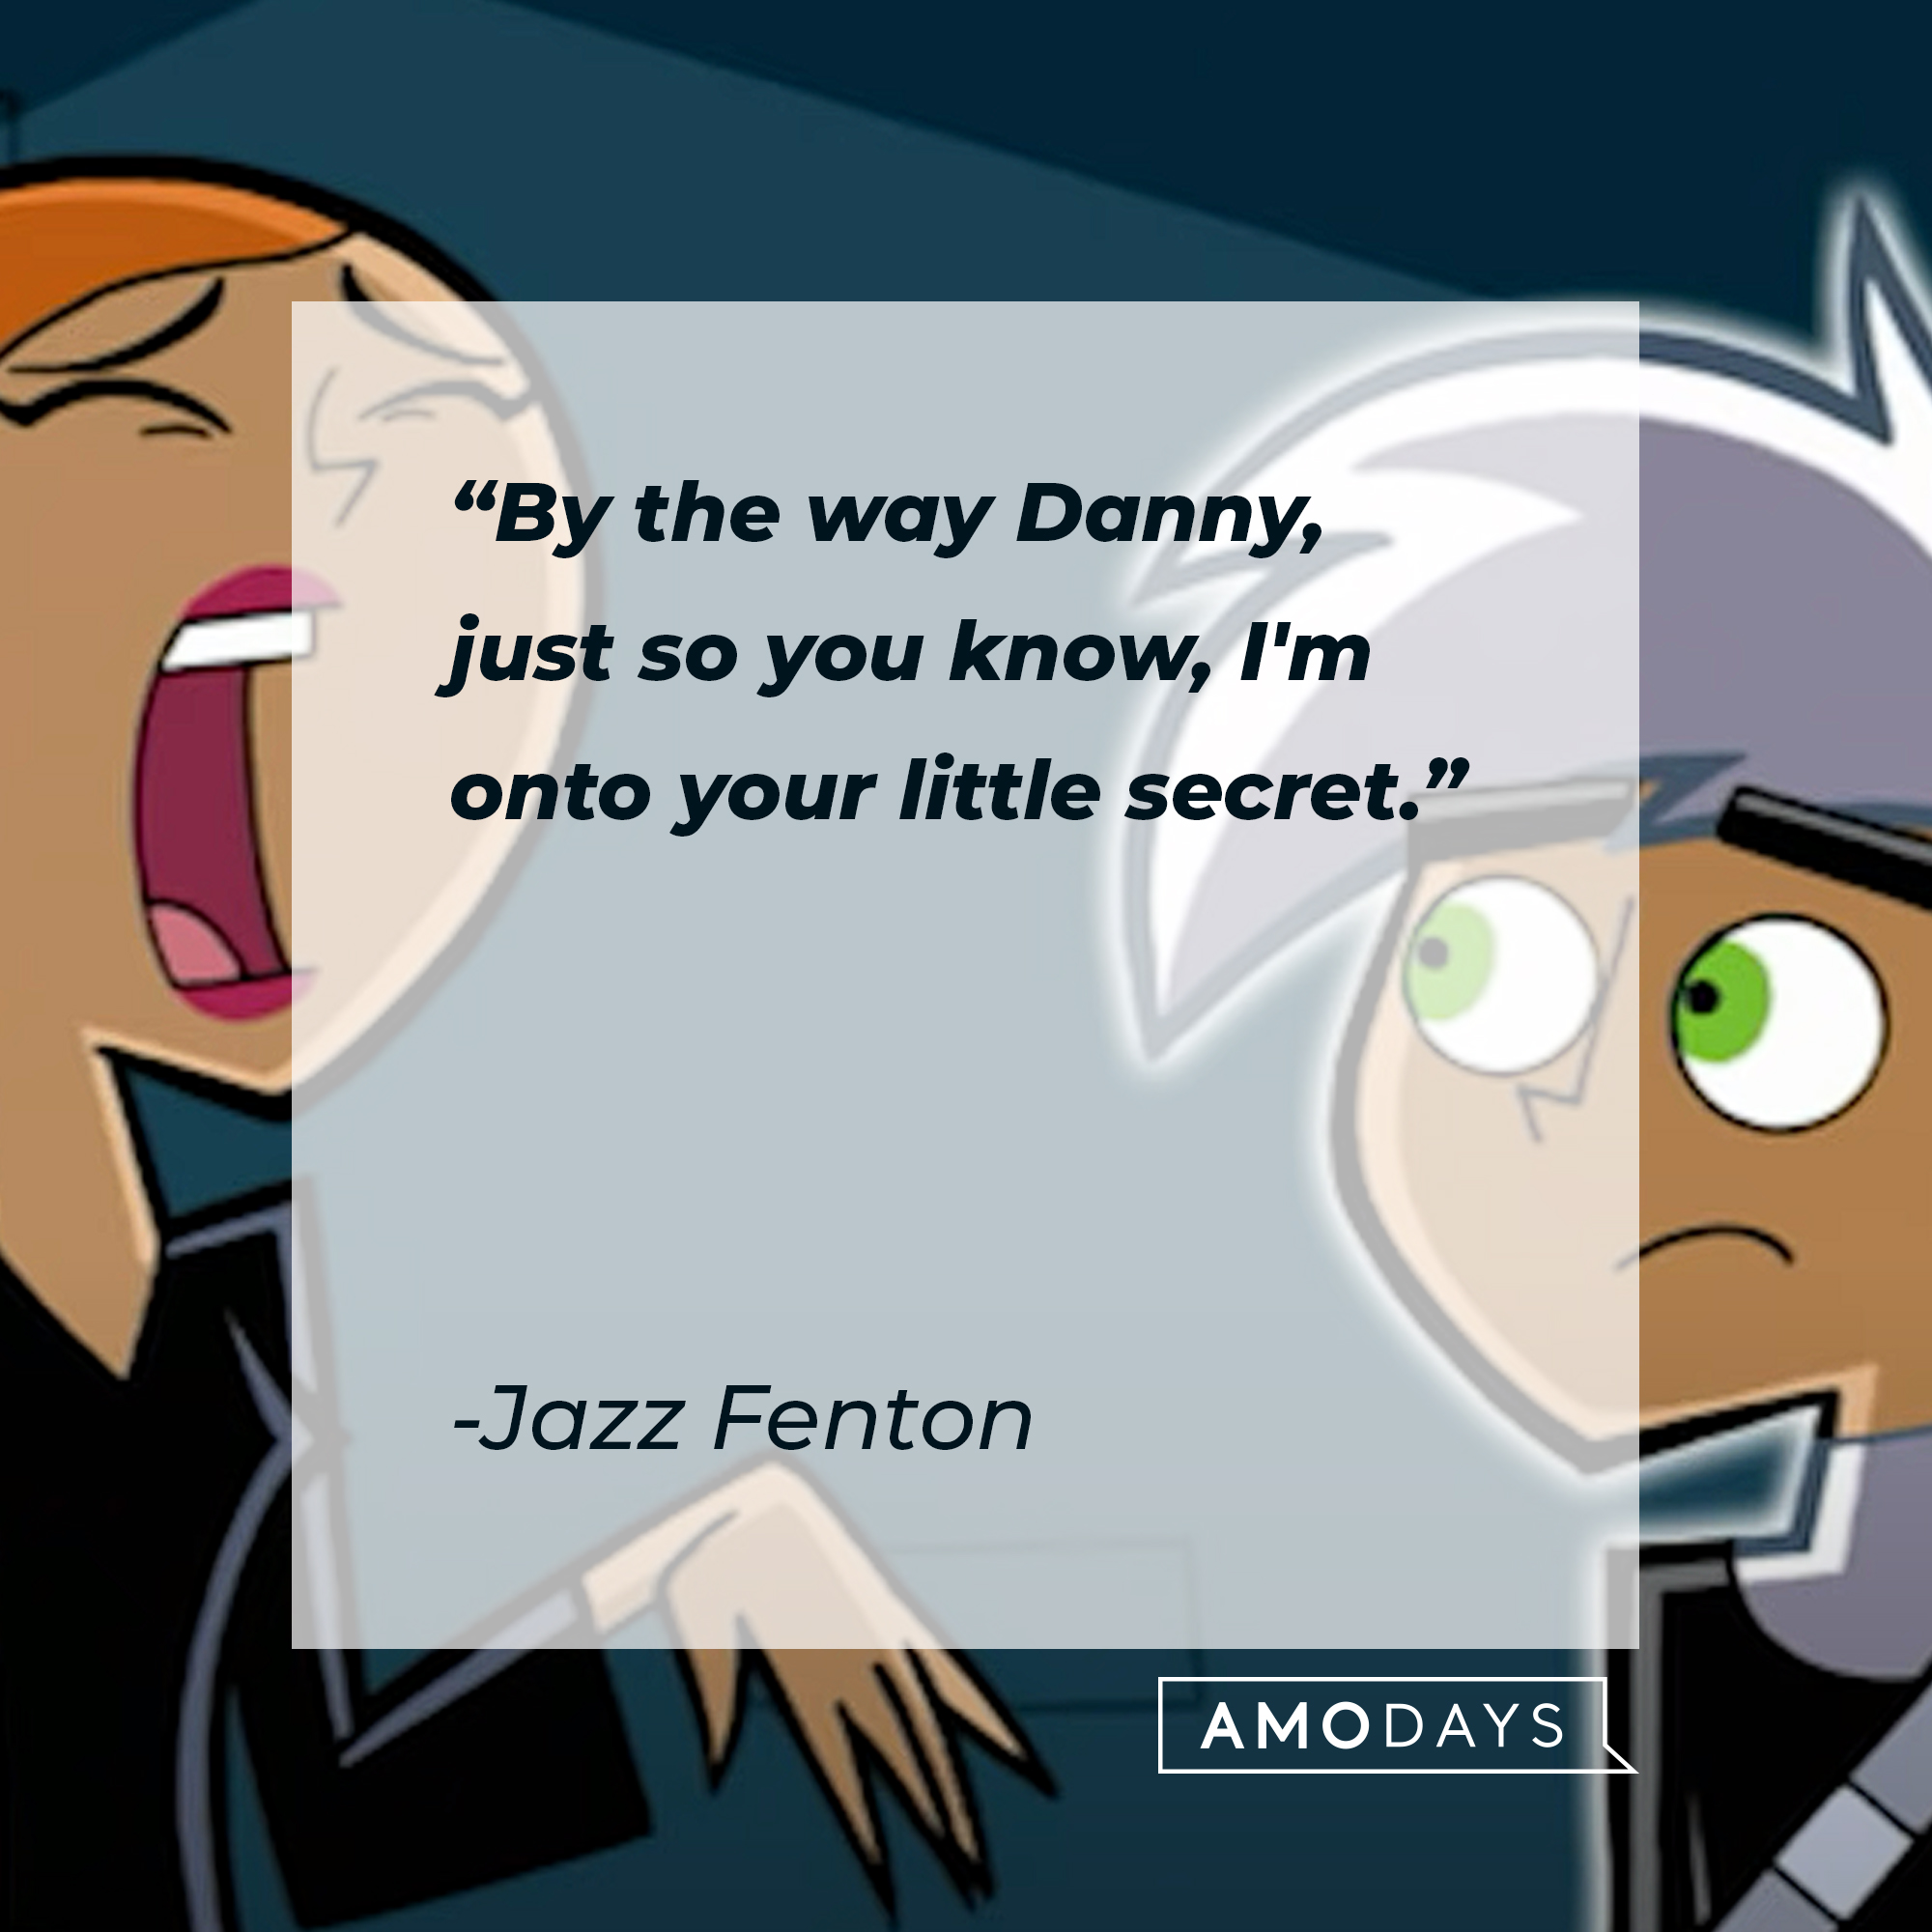 An image of Jazz Fenton and Danny Fenton with Jazz Fenton’s quote: “By the way Danny, just so you know, I'm onto your little secret.” | Source: youtube.com/nickrewind